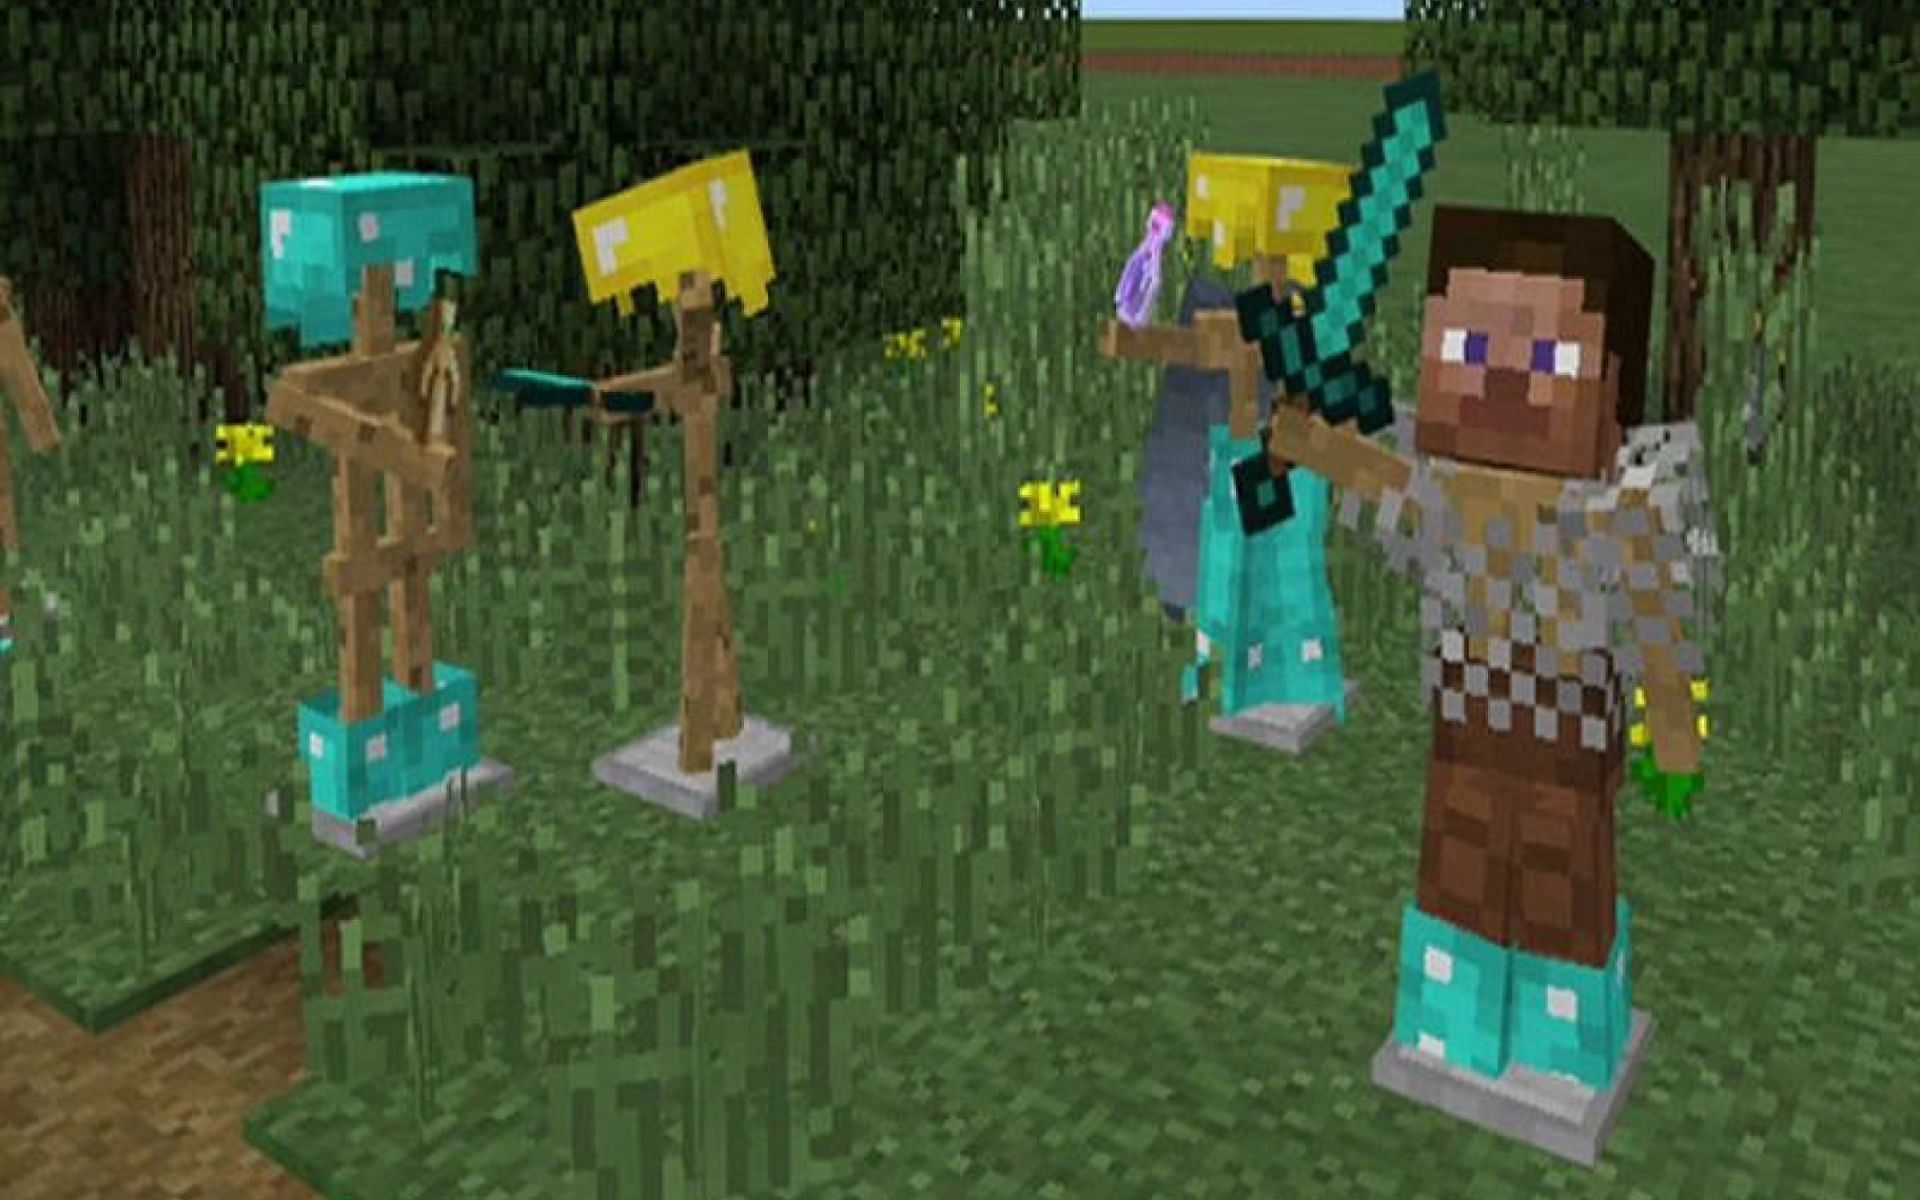 There are several different armor types for Minecraft players to discover. (Image via Minecraft)